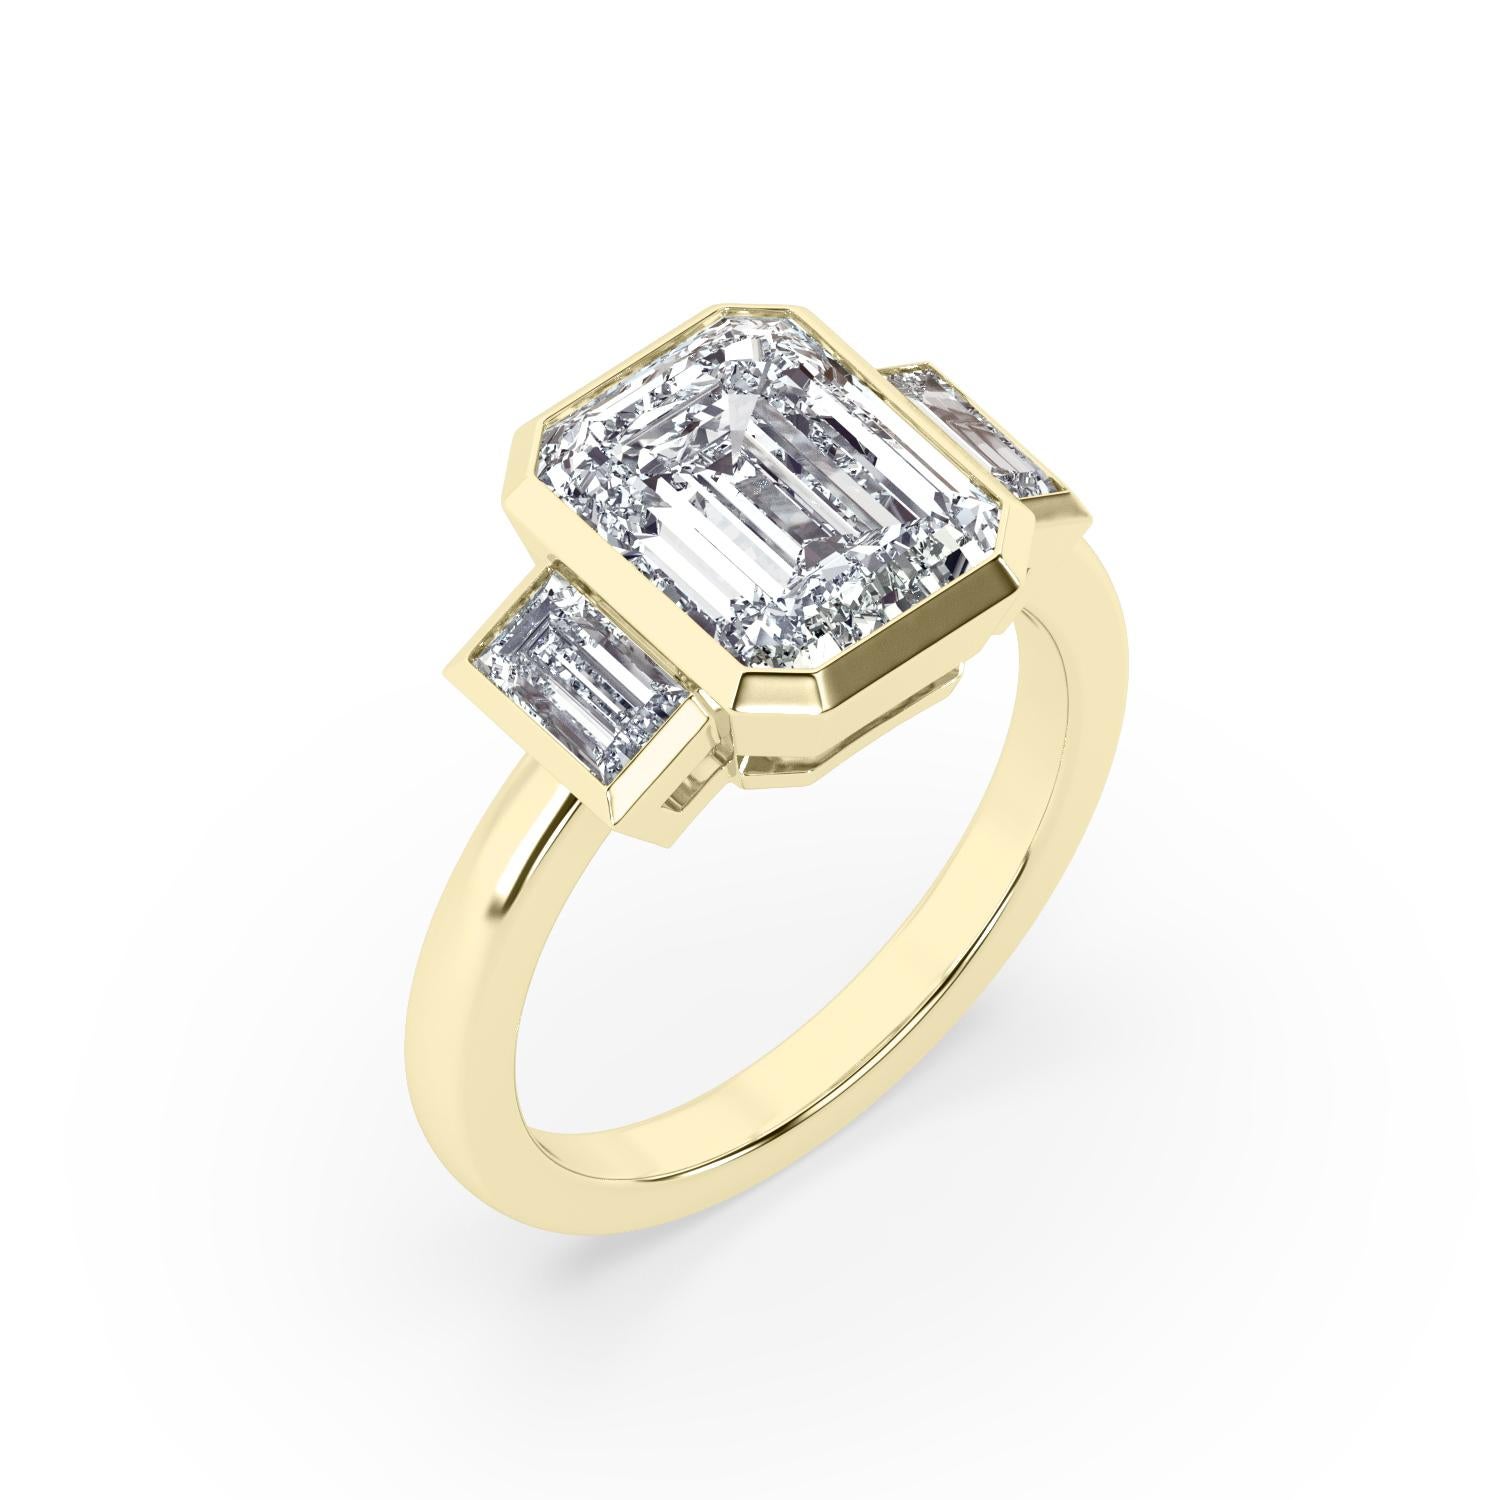 2 carat GIA certified emerald cut diamond engagement ring shown with G color and VS2 clarity (**this ring can be made with a different diamond to accommodate your budget and taste, please contact for more details). 2 side stones of matching quality